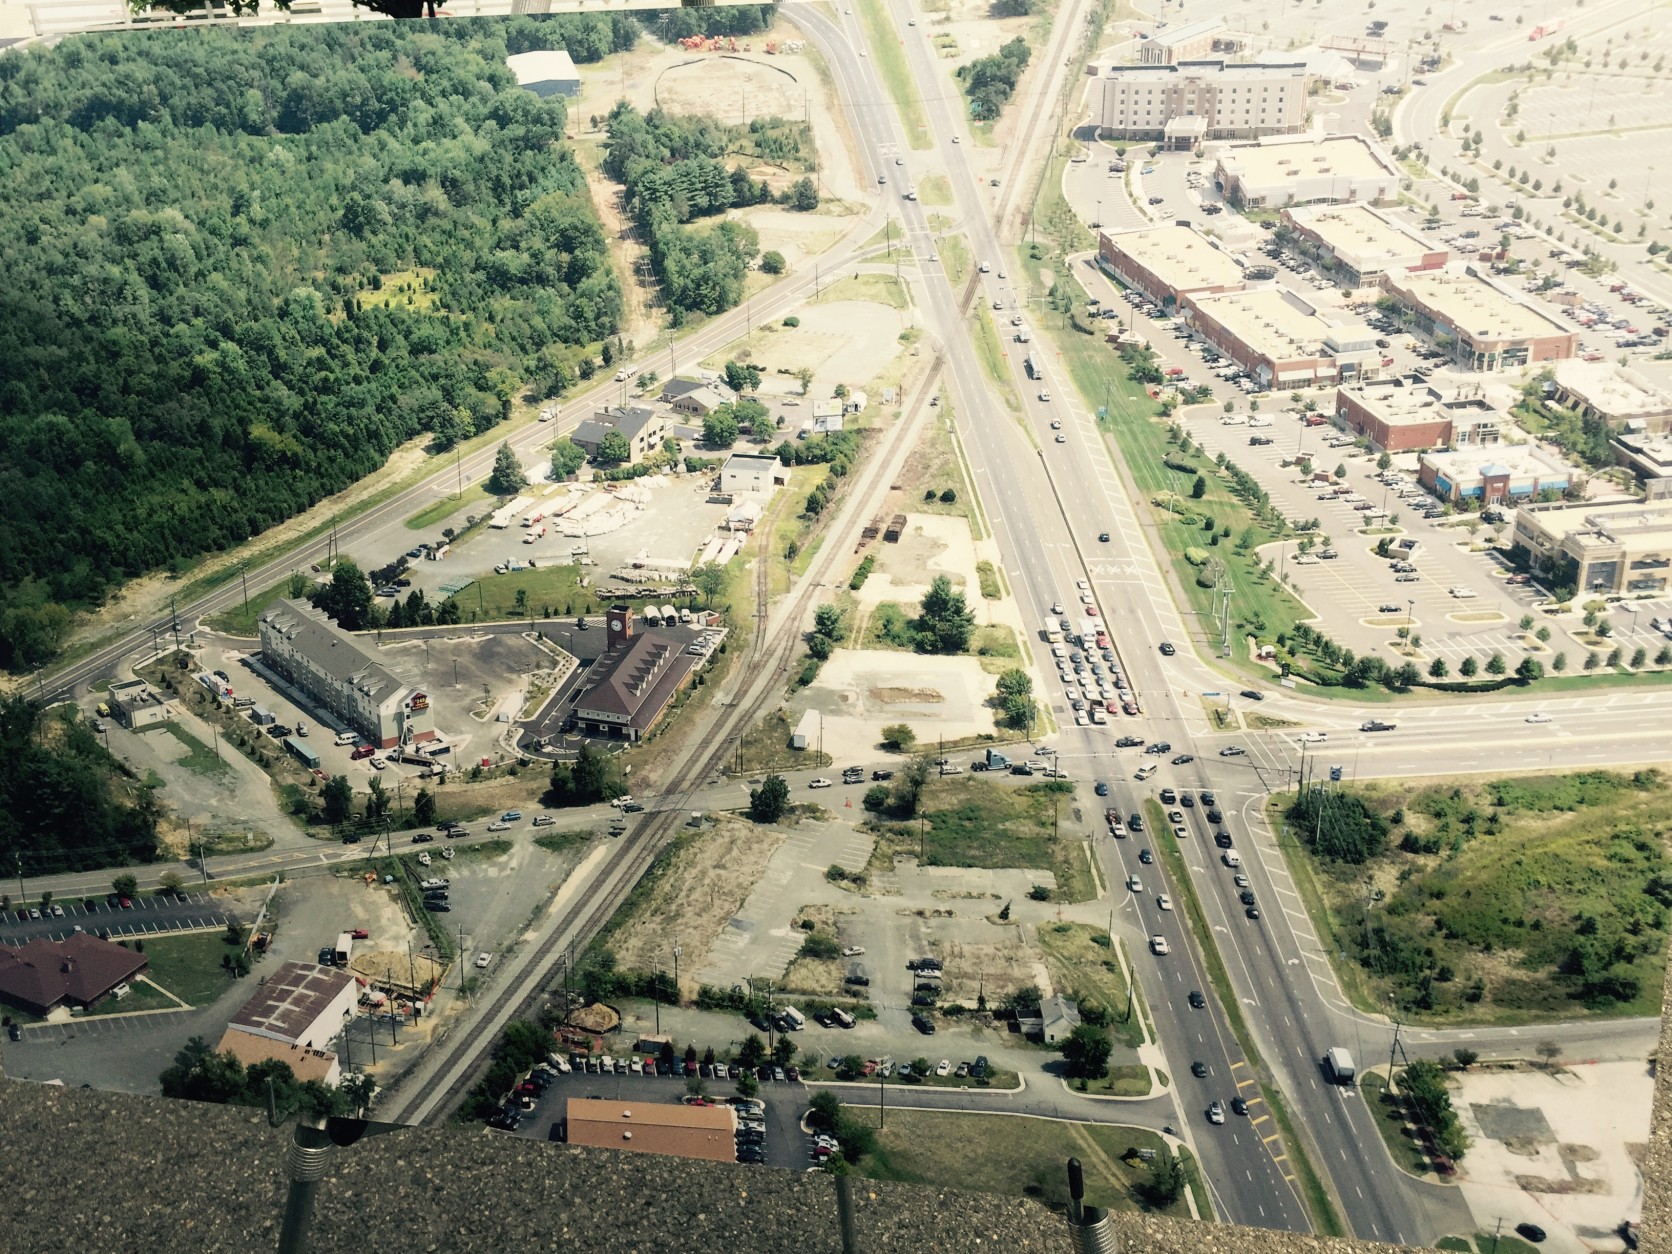 The old interchange in Gainesville. (WTOP/Max Smith)